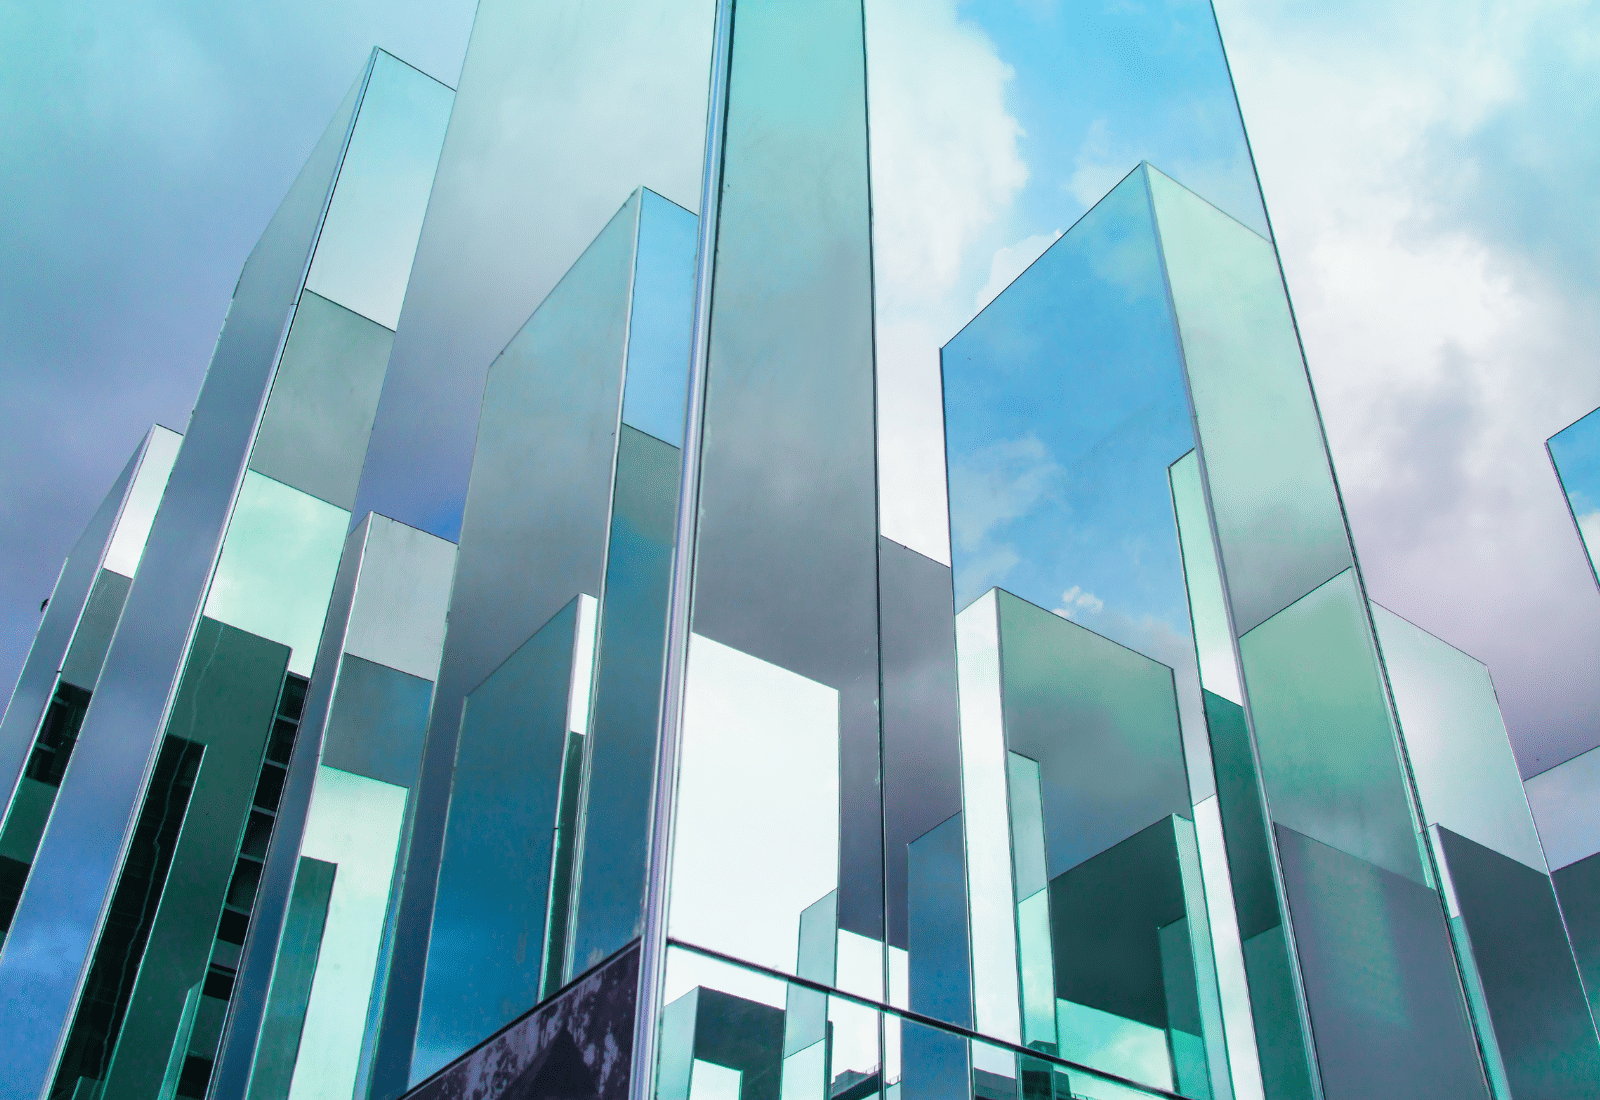 Image of high-rises with glass windows